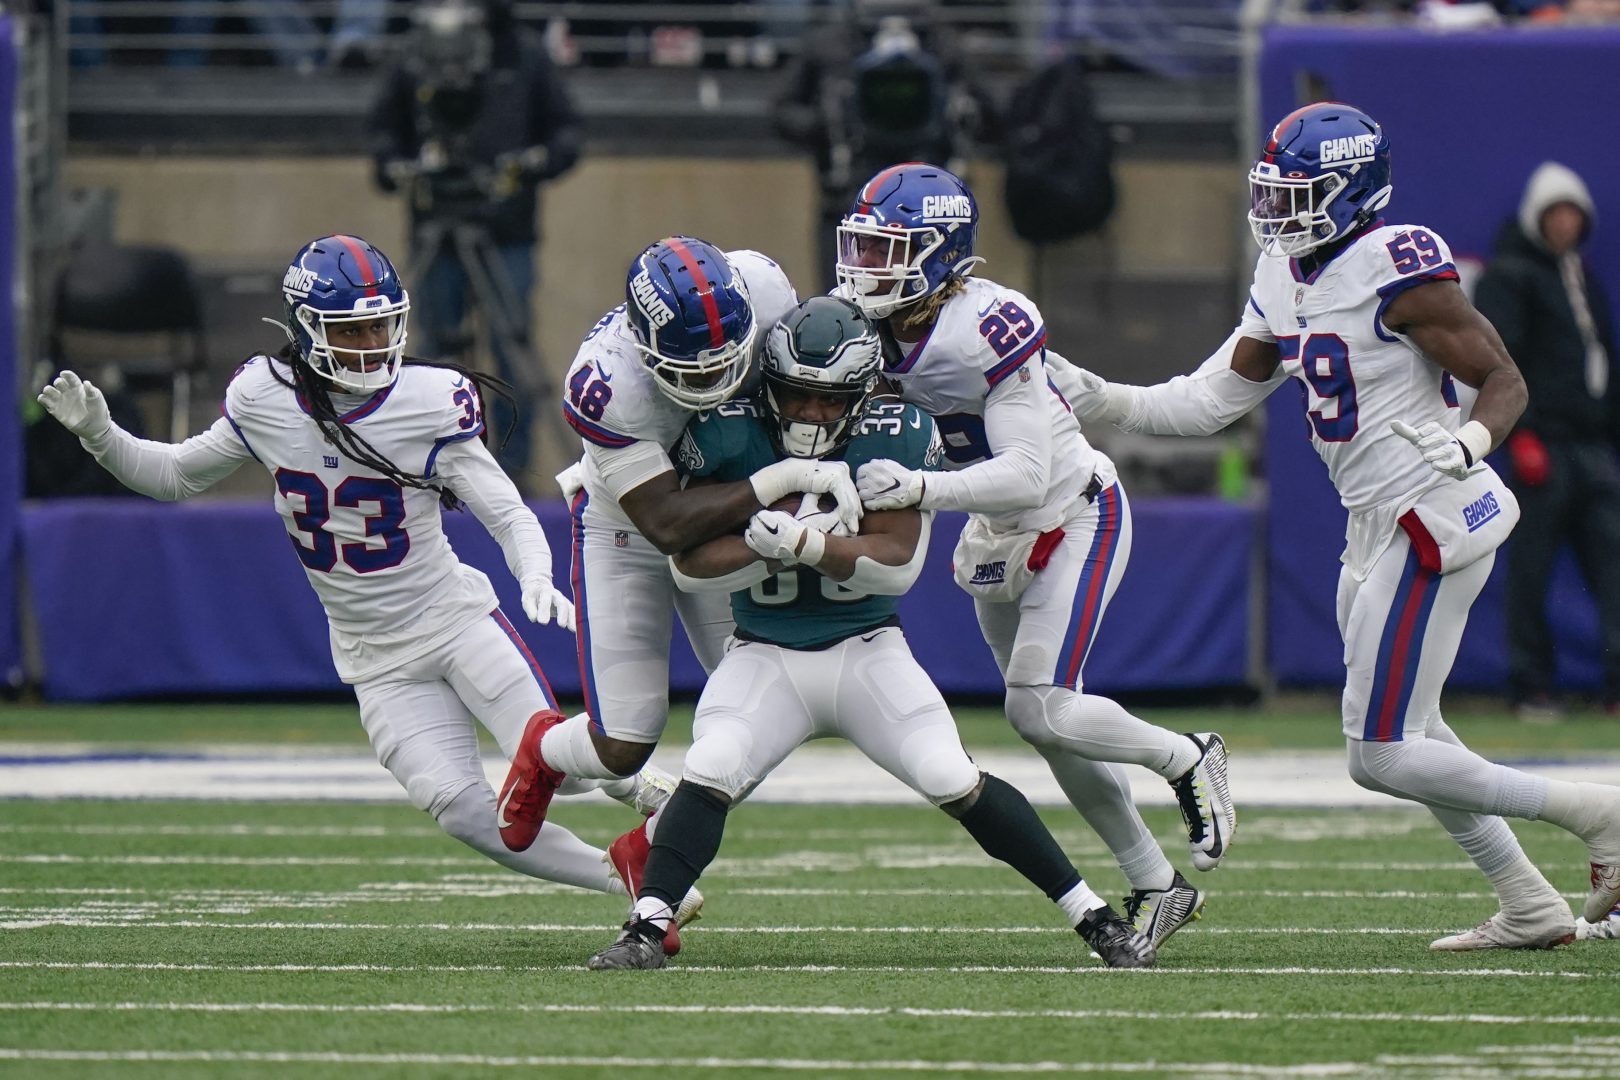 Eagles grounded by own mistakes against Giants, 4 turnovers